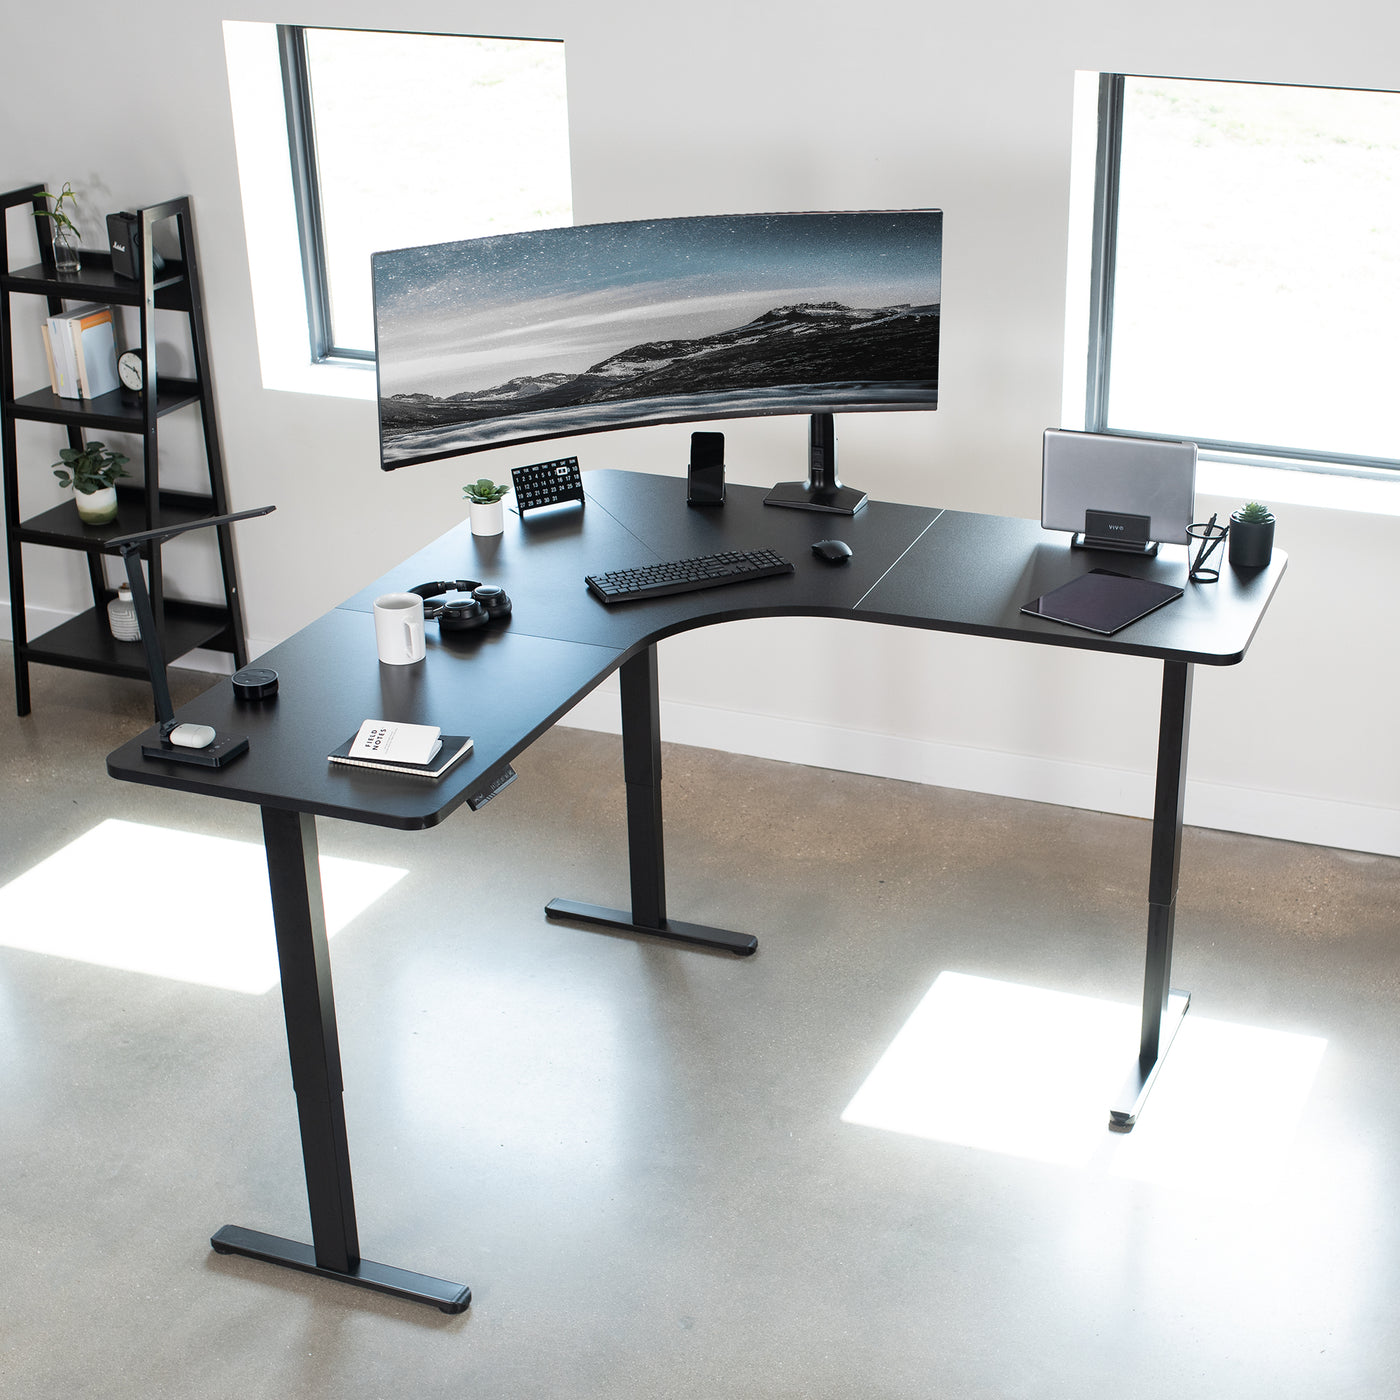 Fully furnished office space inspiration with a black L-shaped electric desk.